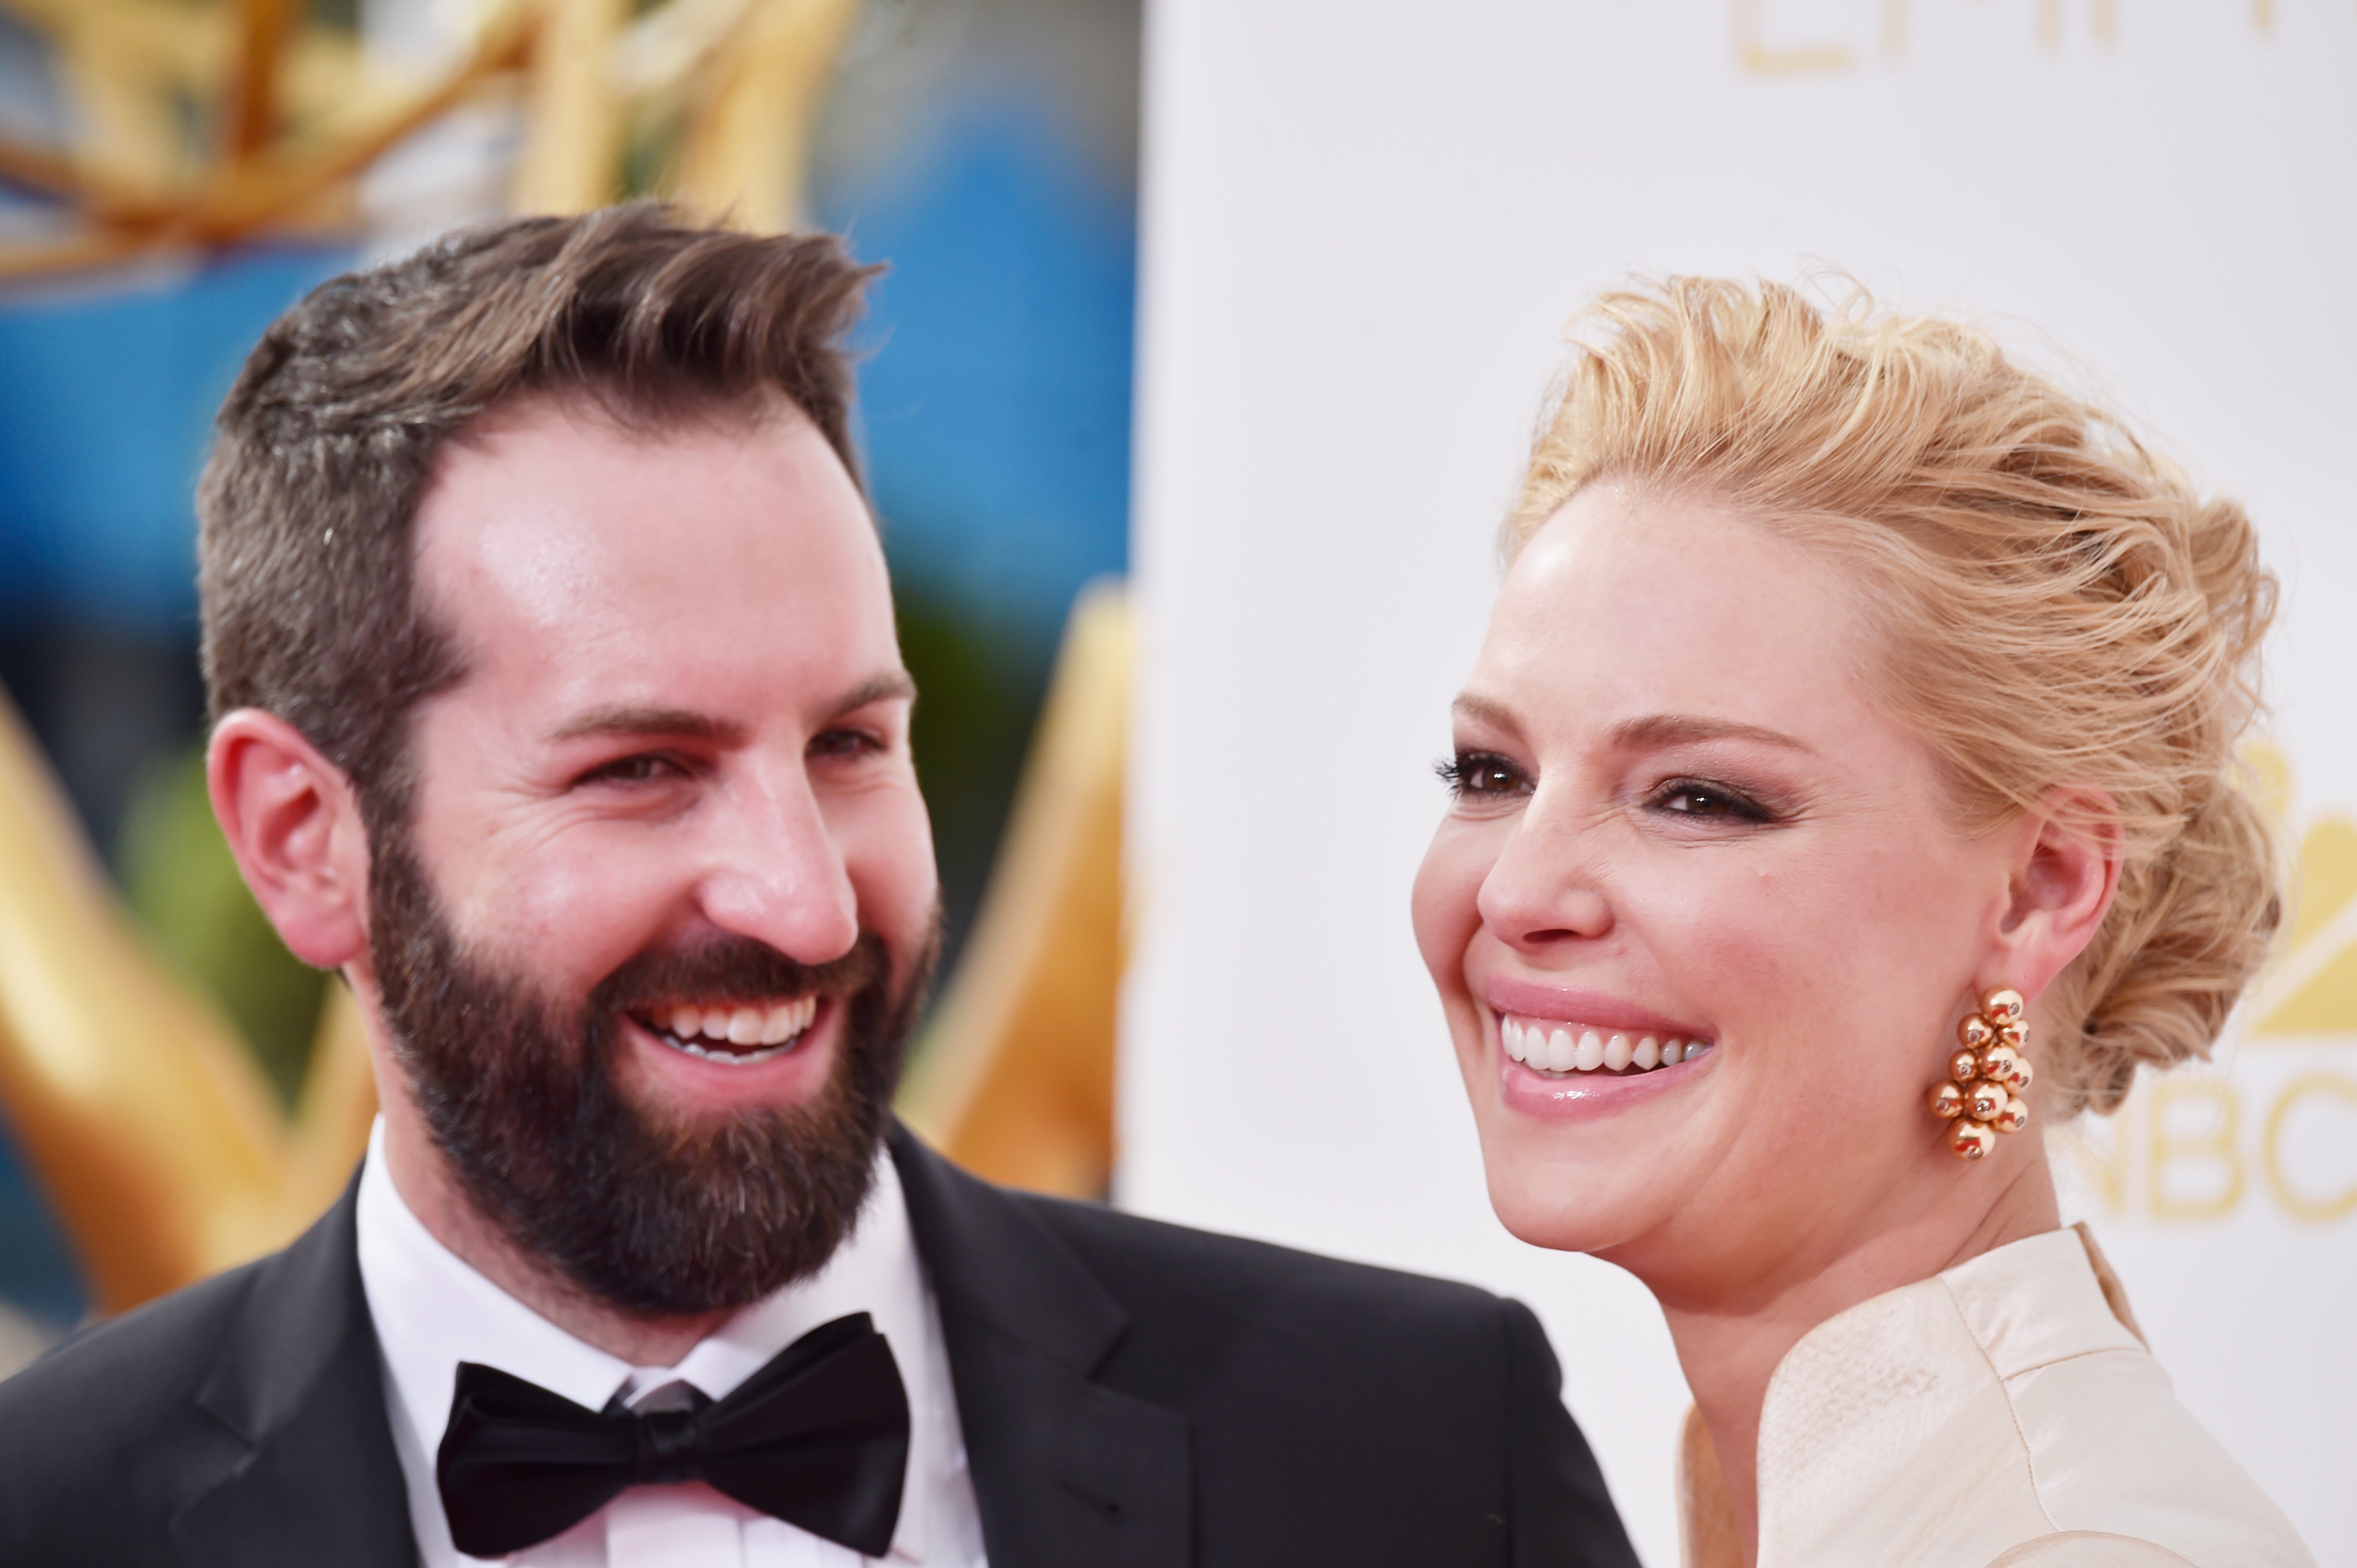 LOS ANGELES, CA - AUGUST 25:  Actress Katherine Heigl (R) and singer Josh Kelley attend the 66th Annual Primetime Emmy Awards held at Nokia Theatre L.A. Live on August 25, 2014 in Los Angeles, California.  (Photo by Frazer Harrison/Getty Images) (Frazer Harrison—Getty Images)